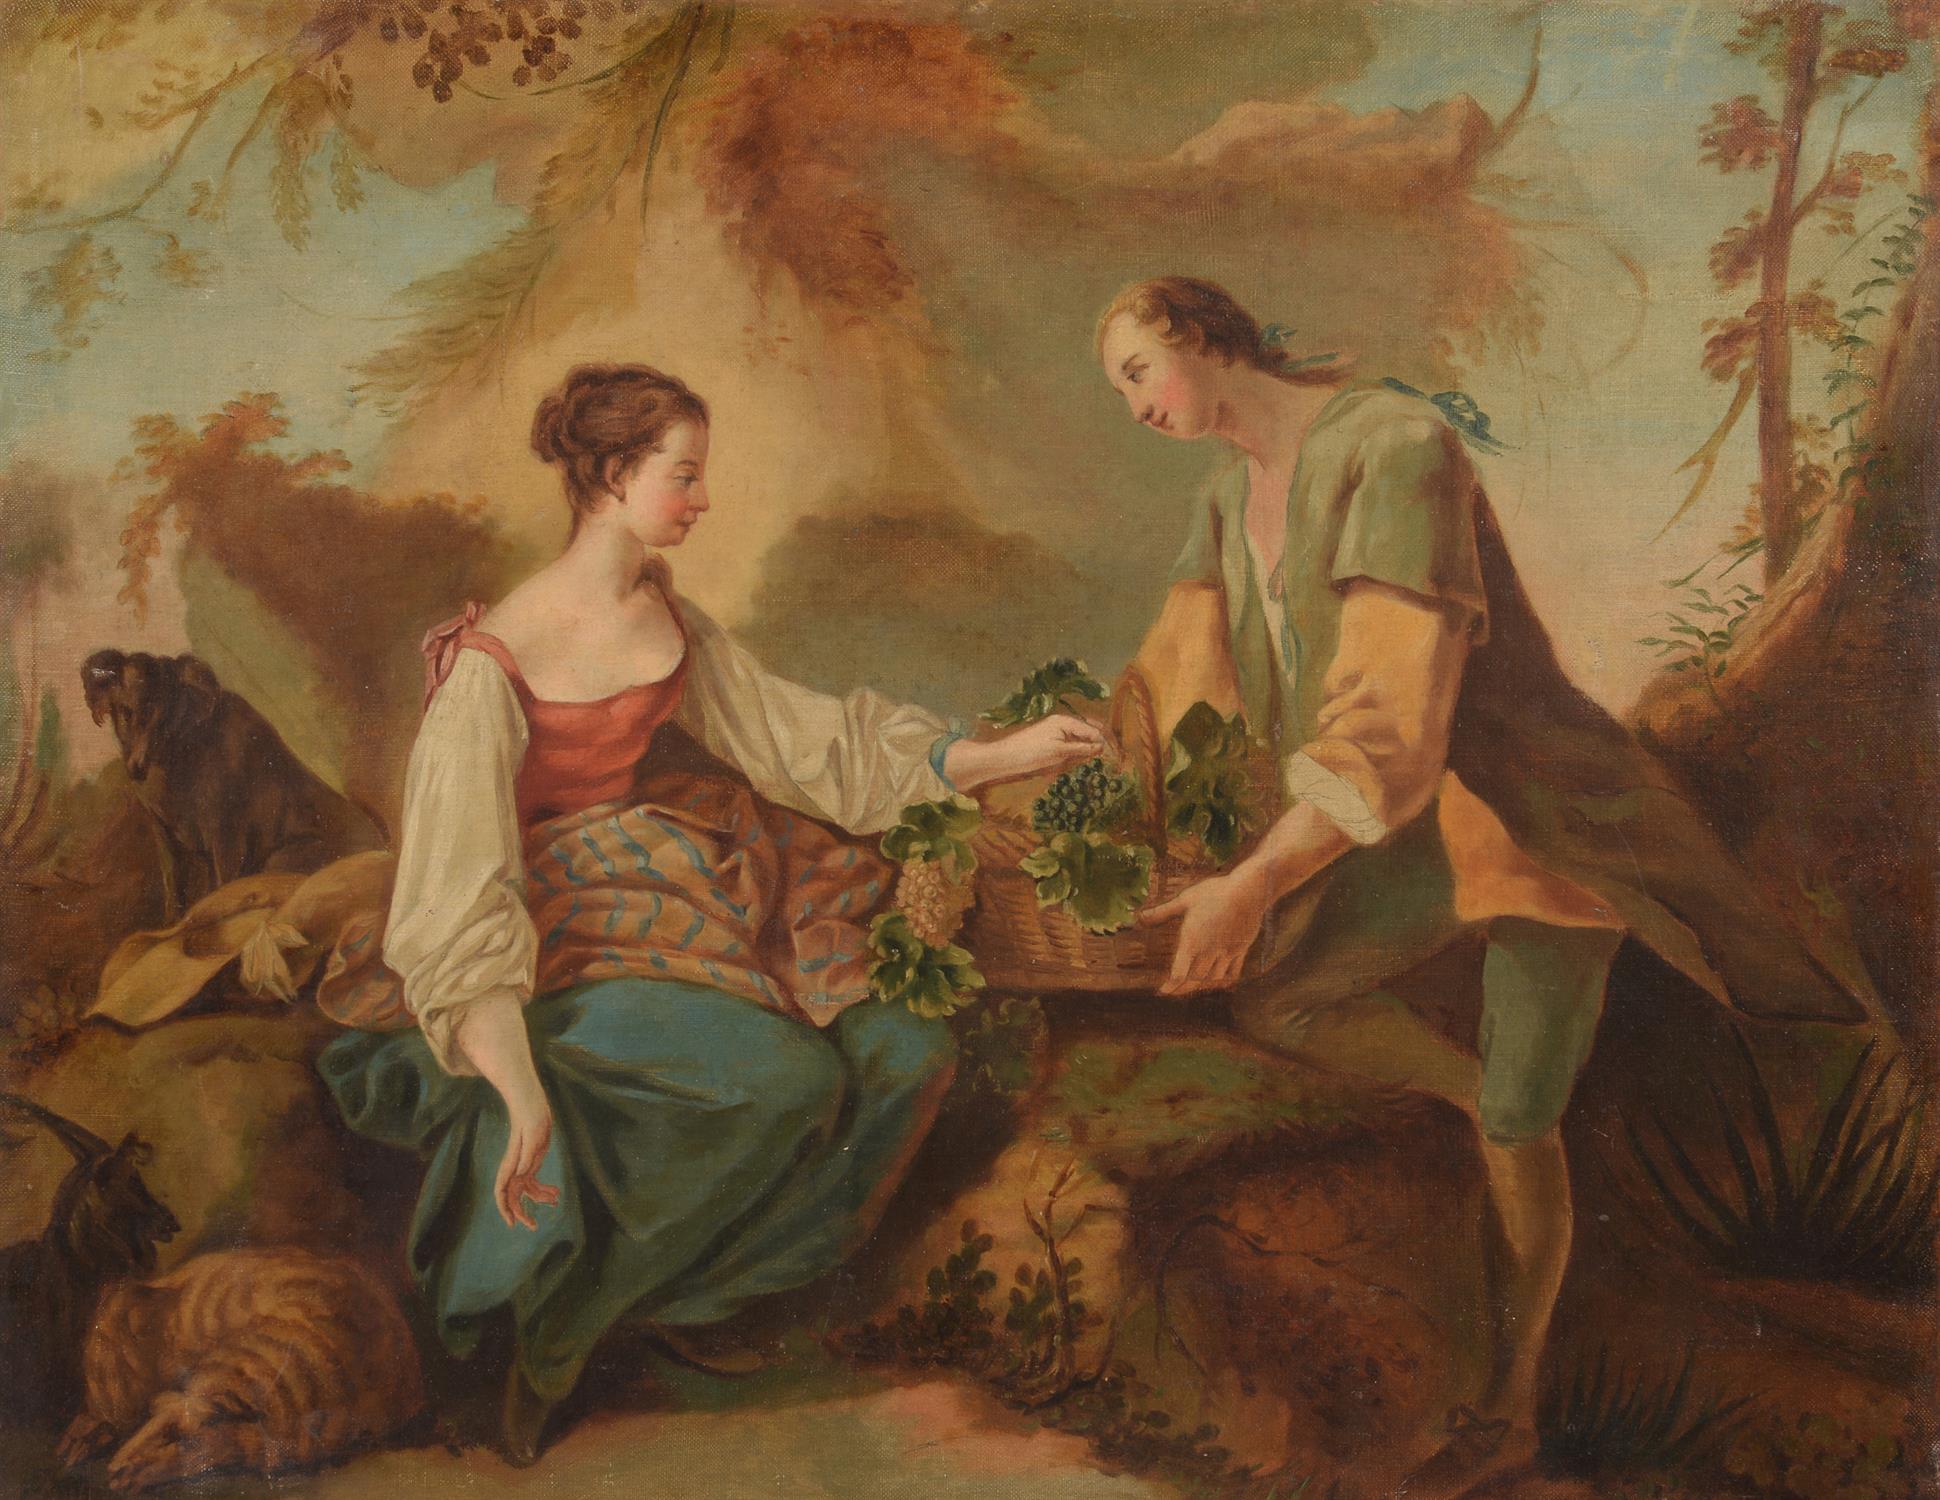 Manner of François Boucher, Presenting the fruit, courting couple